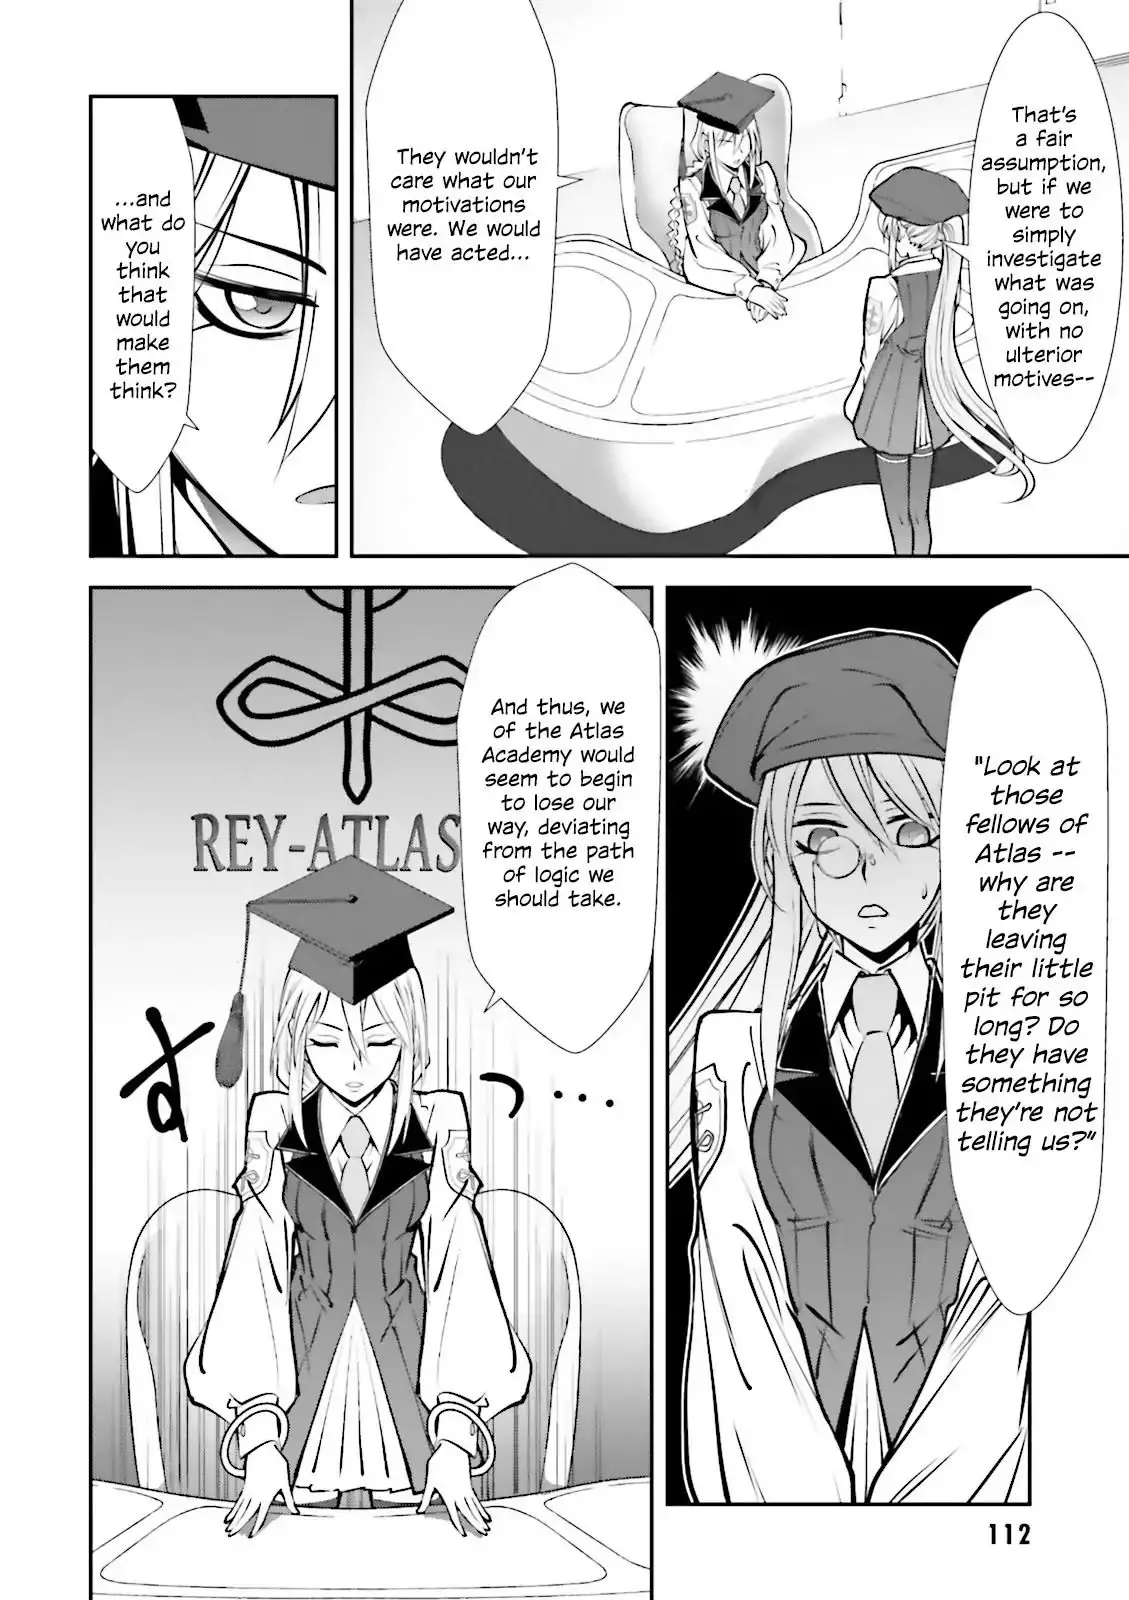 Melty Blood - Back Alley Alliance Nightmare - 3 page 22